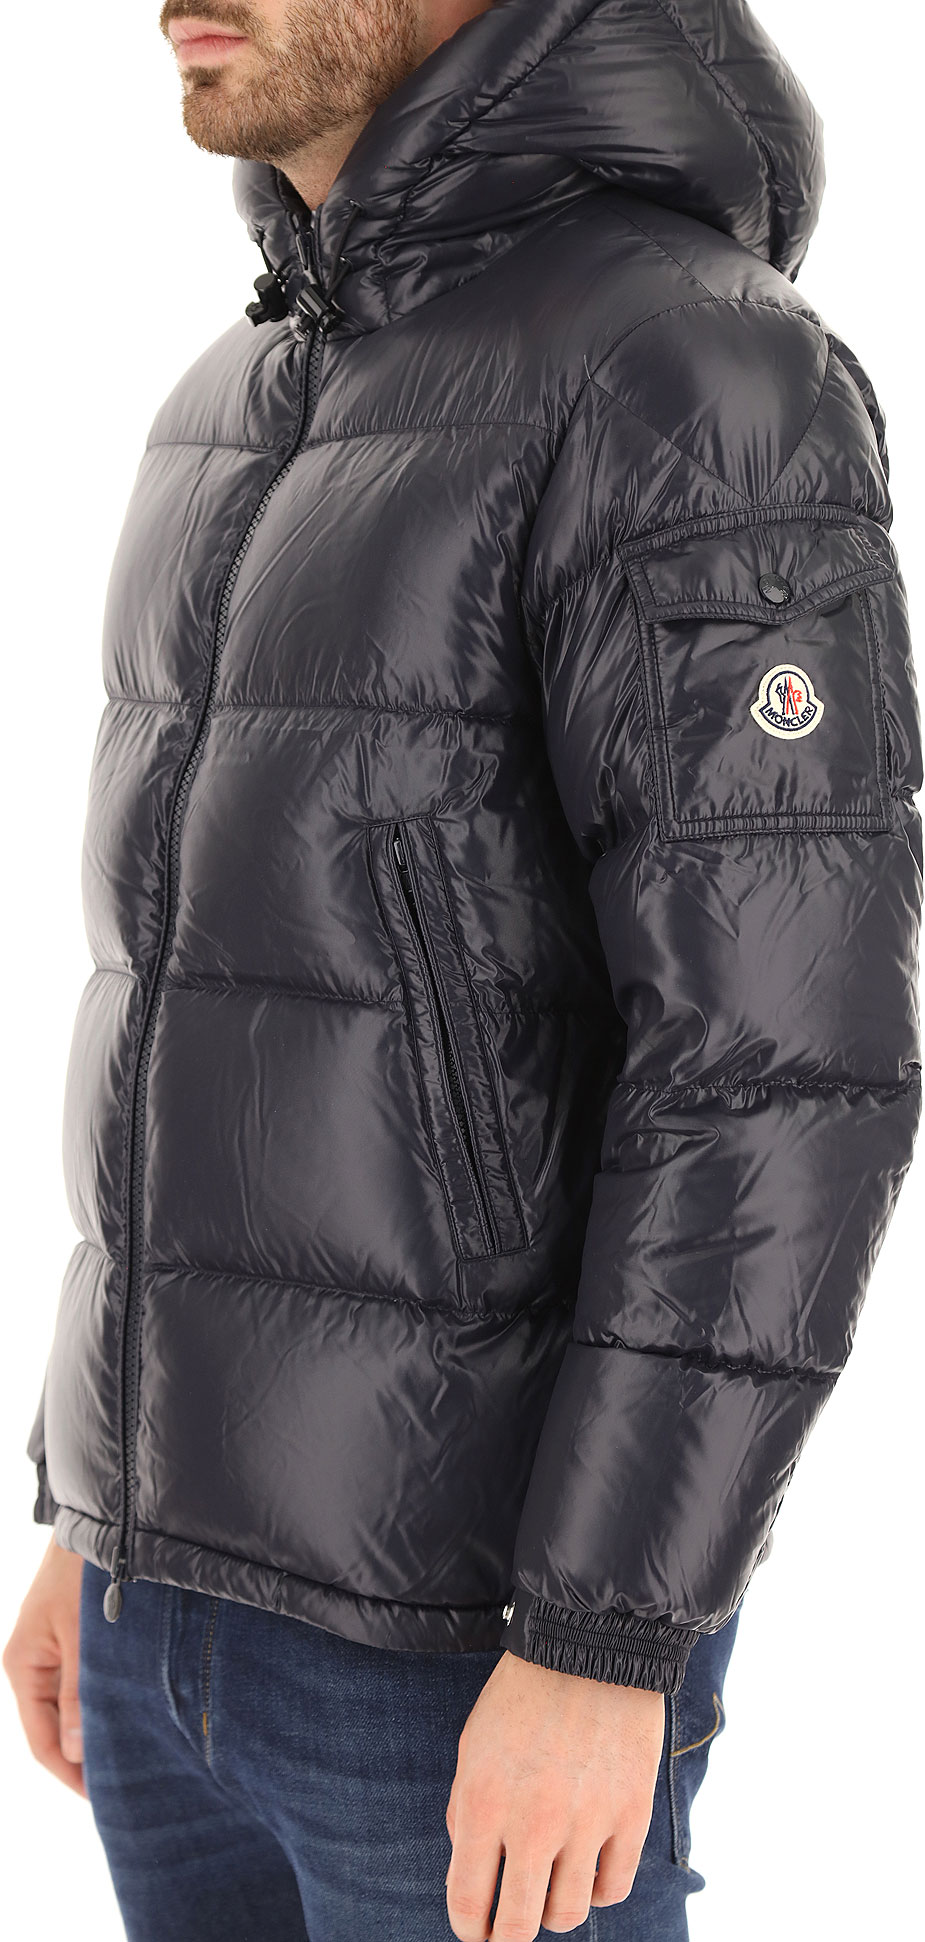 Mens Clothing Moncler, Style code: 1a5450068950-742-ecrins